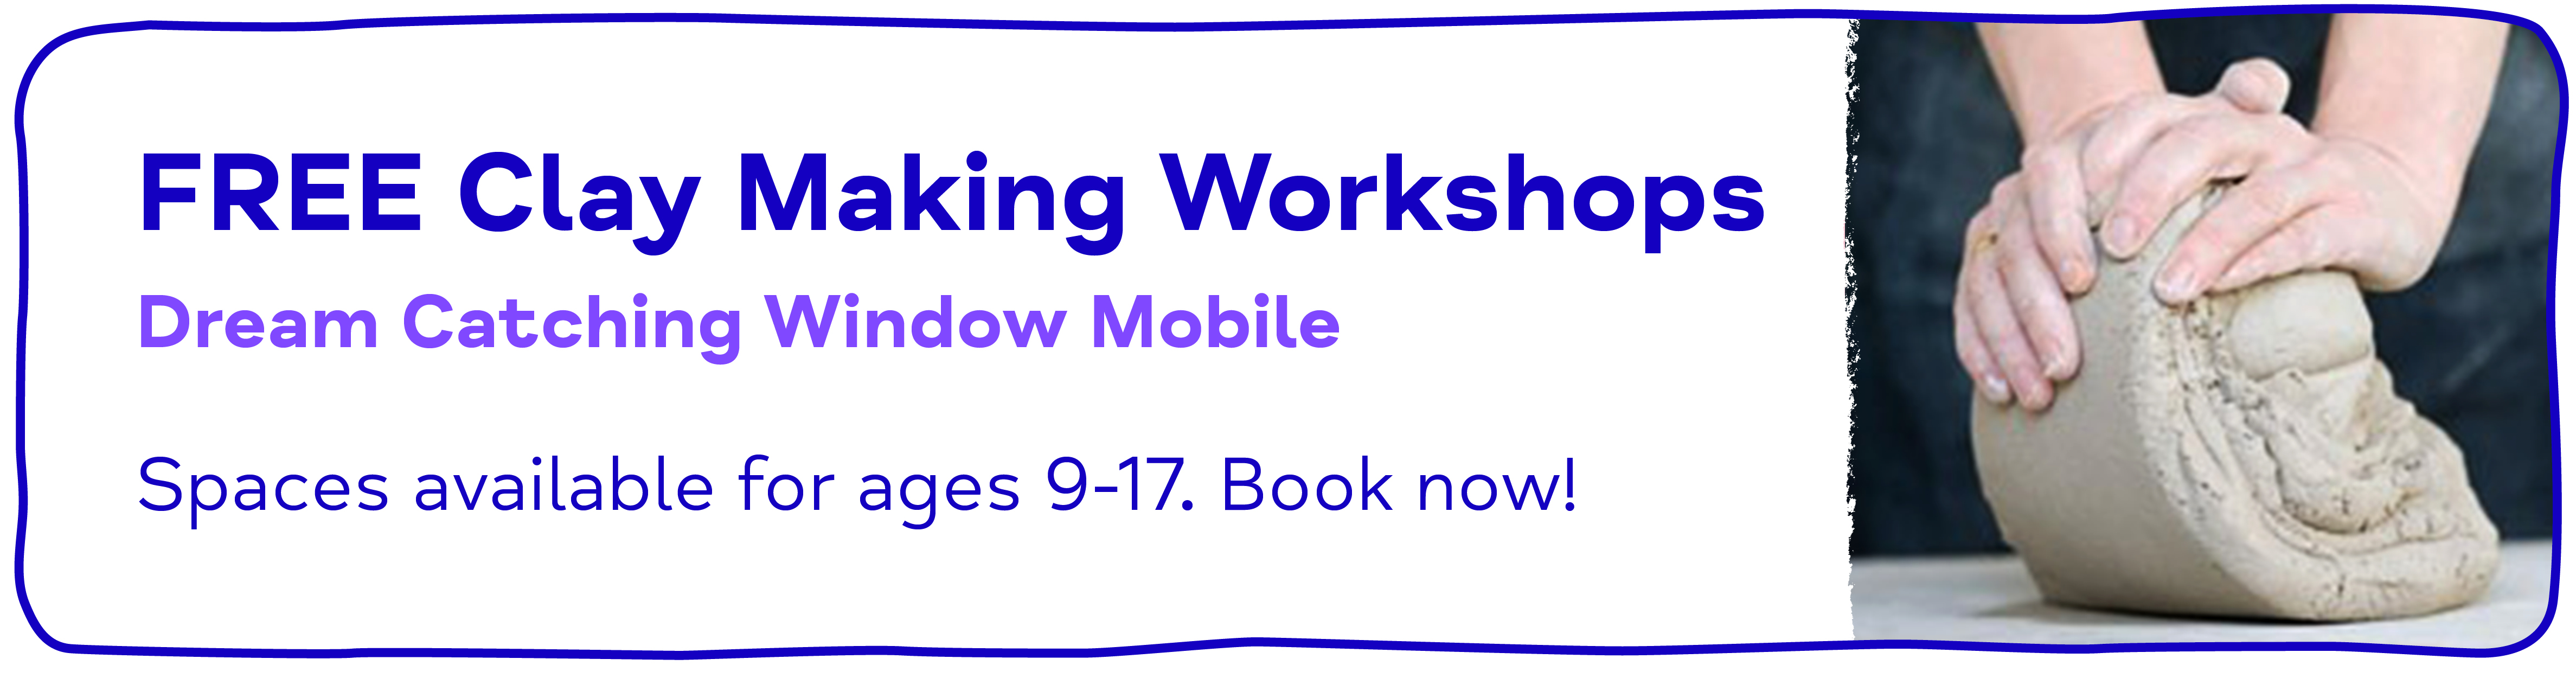 FREE Clay Making Workshops Dream Catching Window Mobile Spaces available for ages 9-17. Book now!